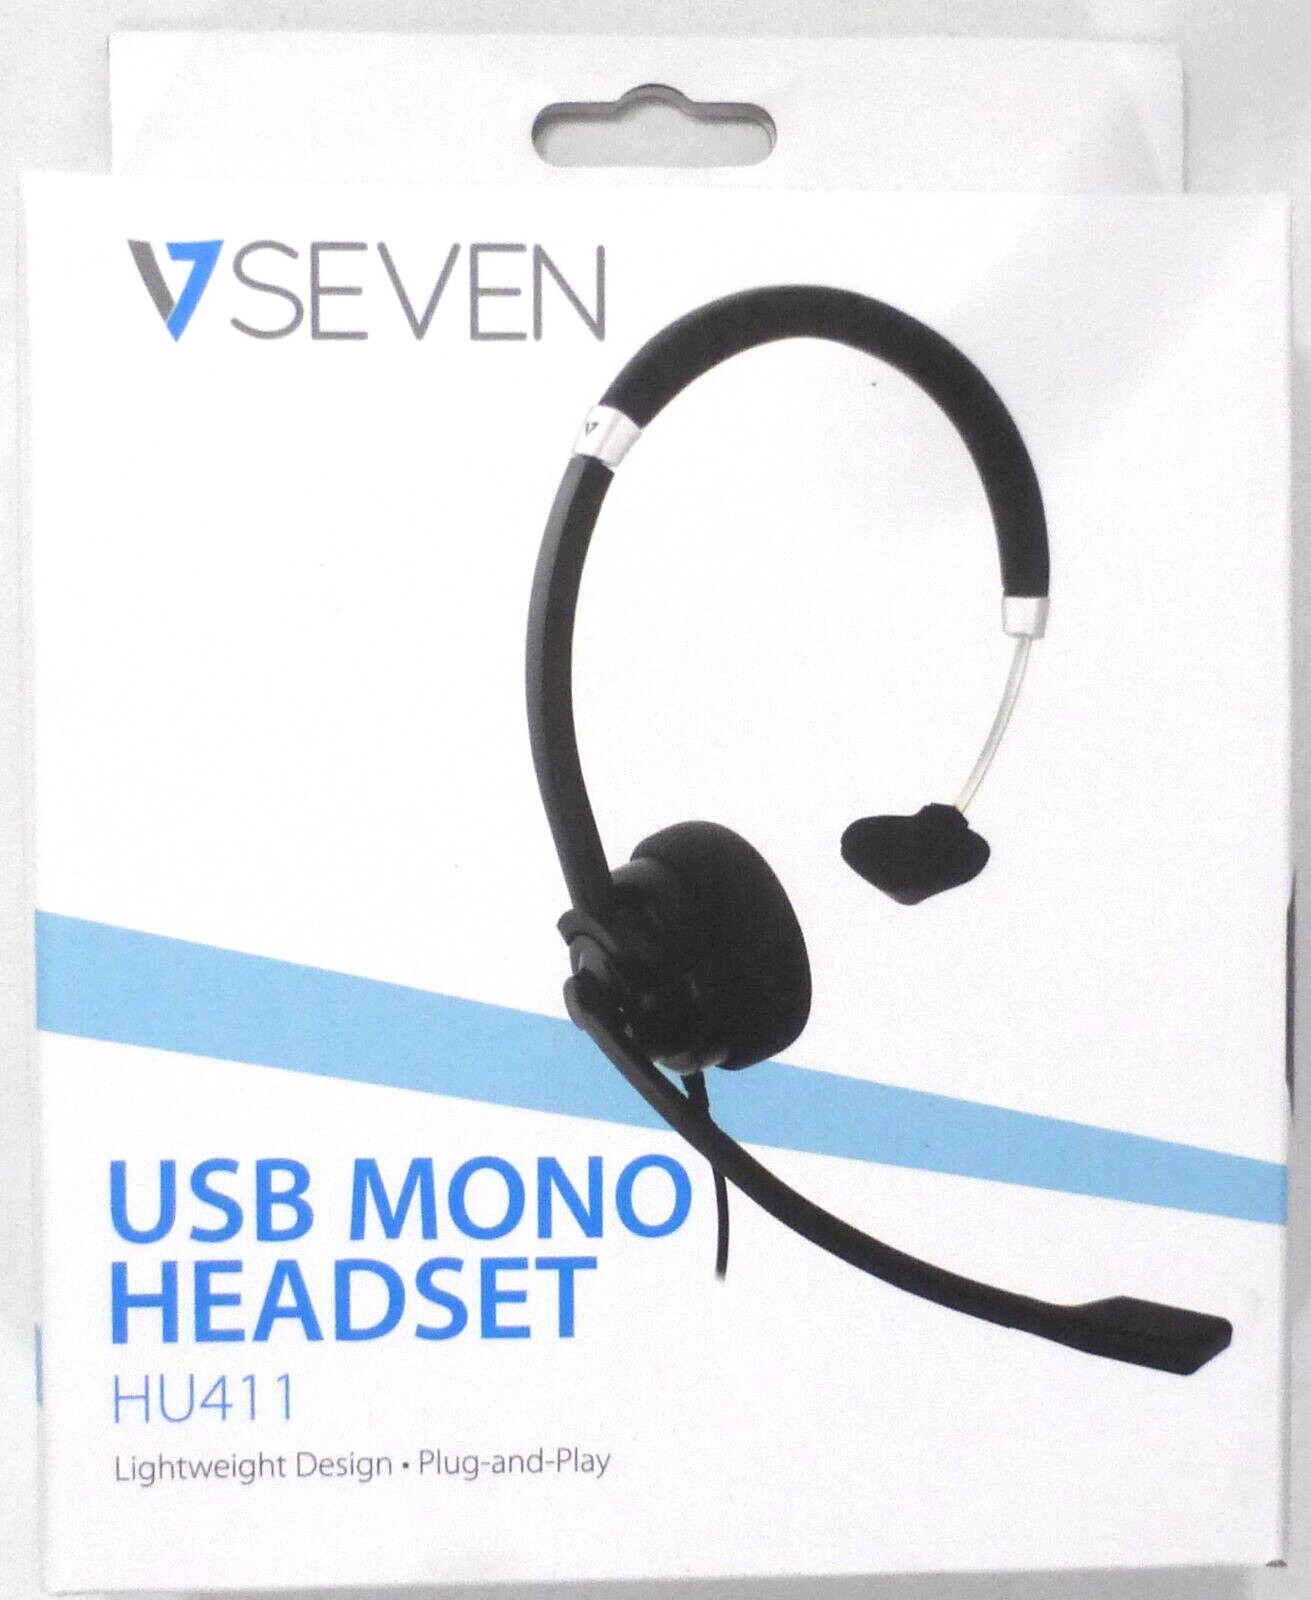 V7 Deluxe Mono USB Headset with Boom Microphone, Plug-and-Play, HU411, NEW